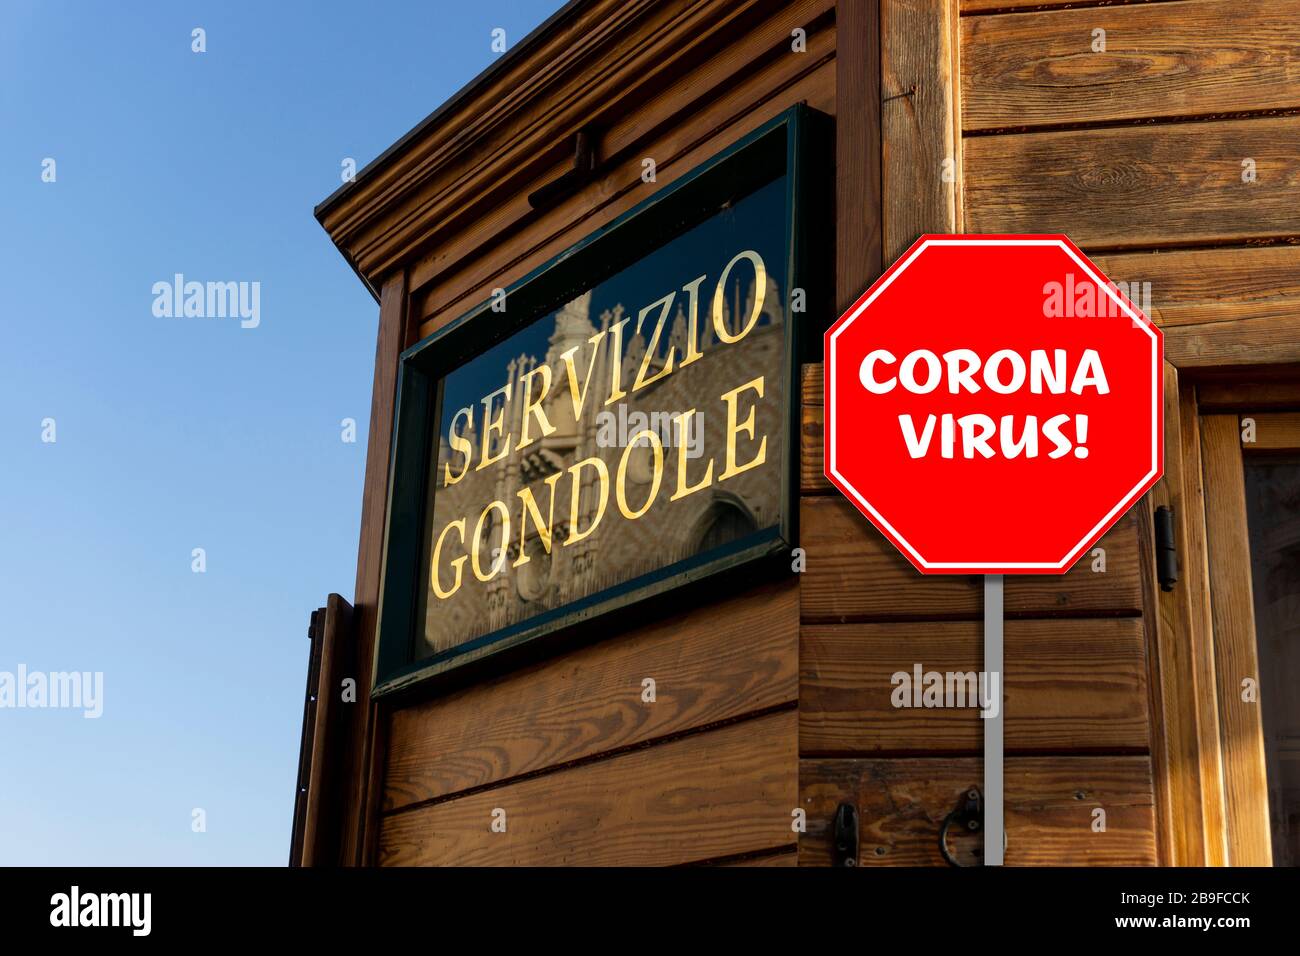 View of the wooden bulding of the Servizio Gondole in Venice with a stop sign that says Corona Virus! Stock Photo